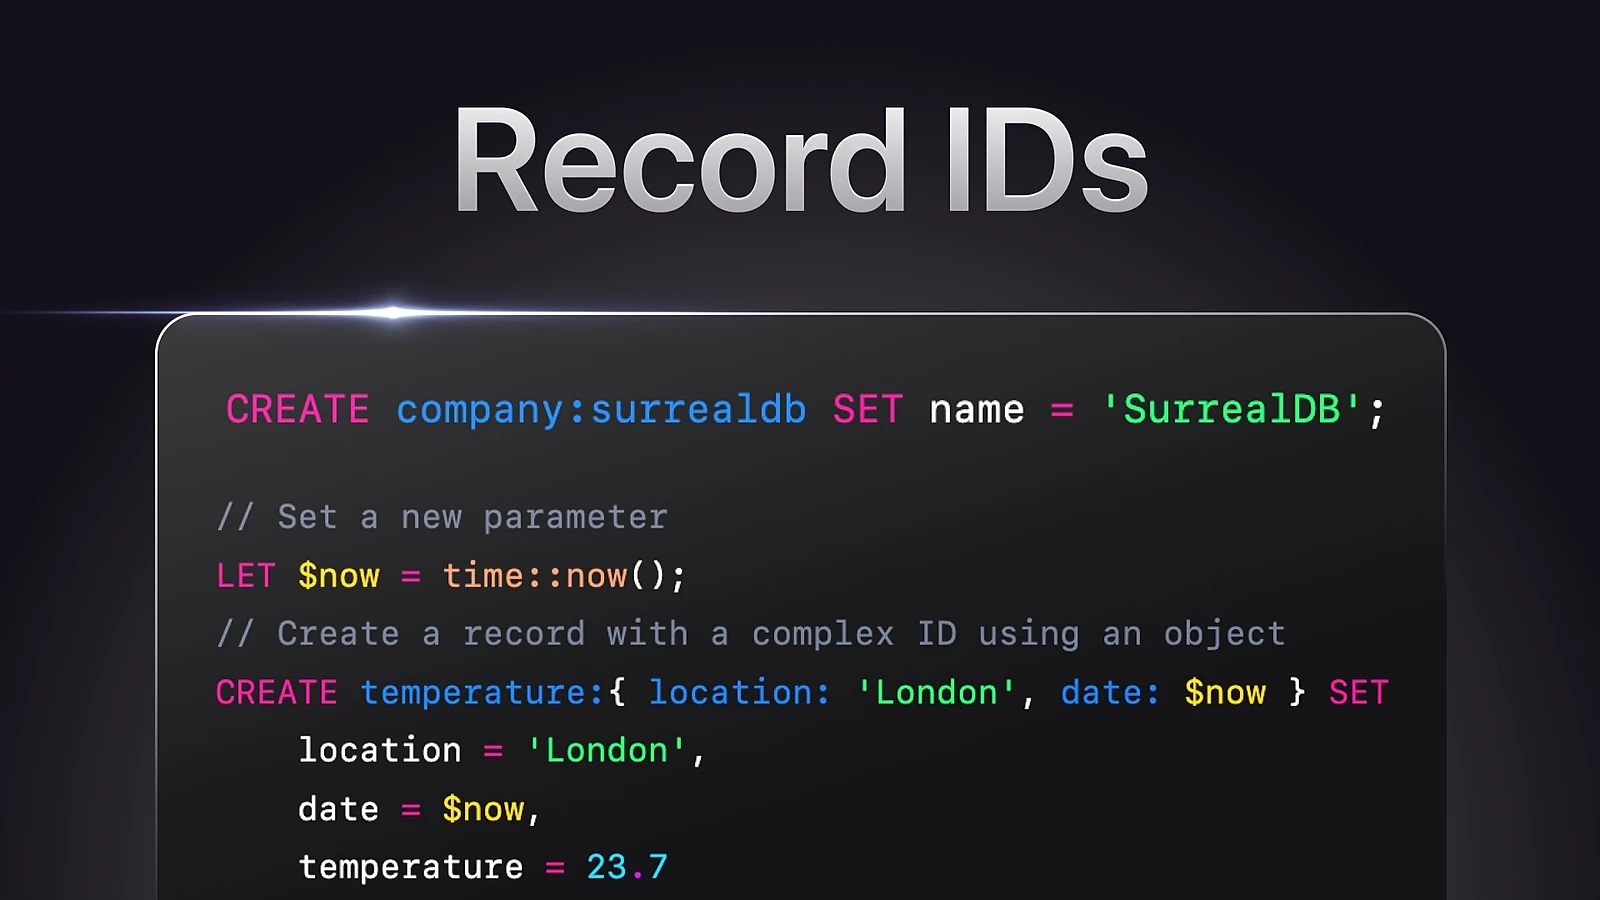 The life-changing magic of SurrealDB - record IDs